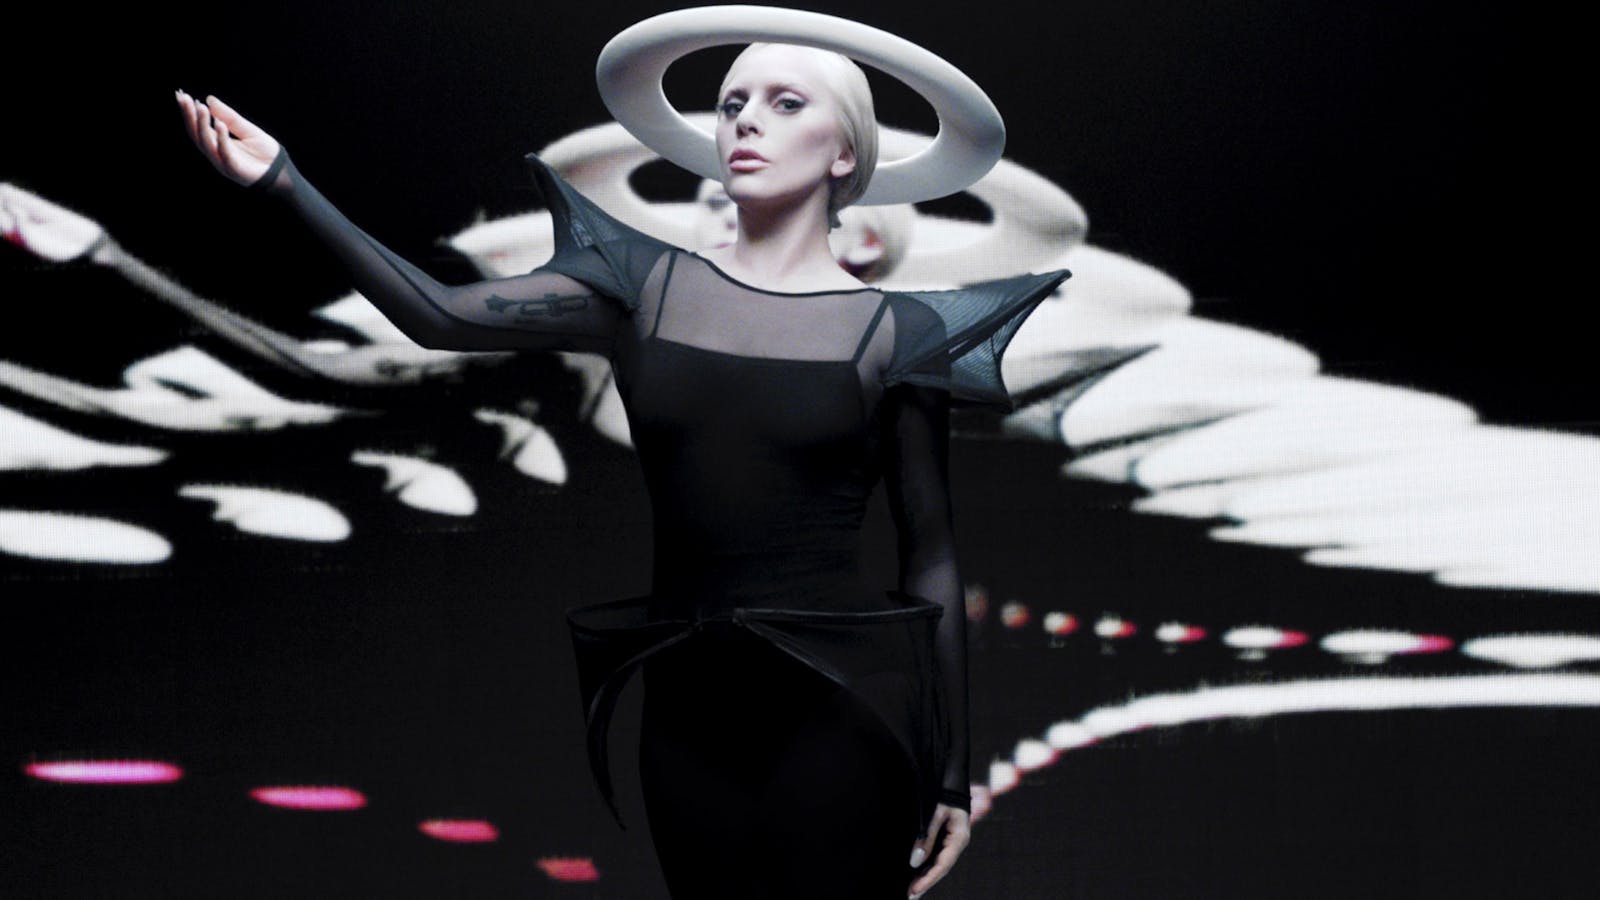 A publicity photo from Lady Gaga's collaboration with Intel. Photo by Intel 